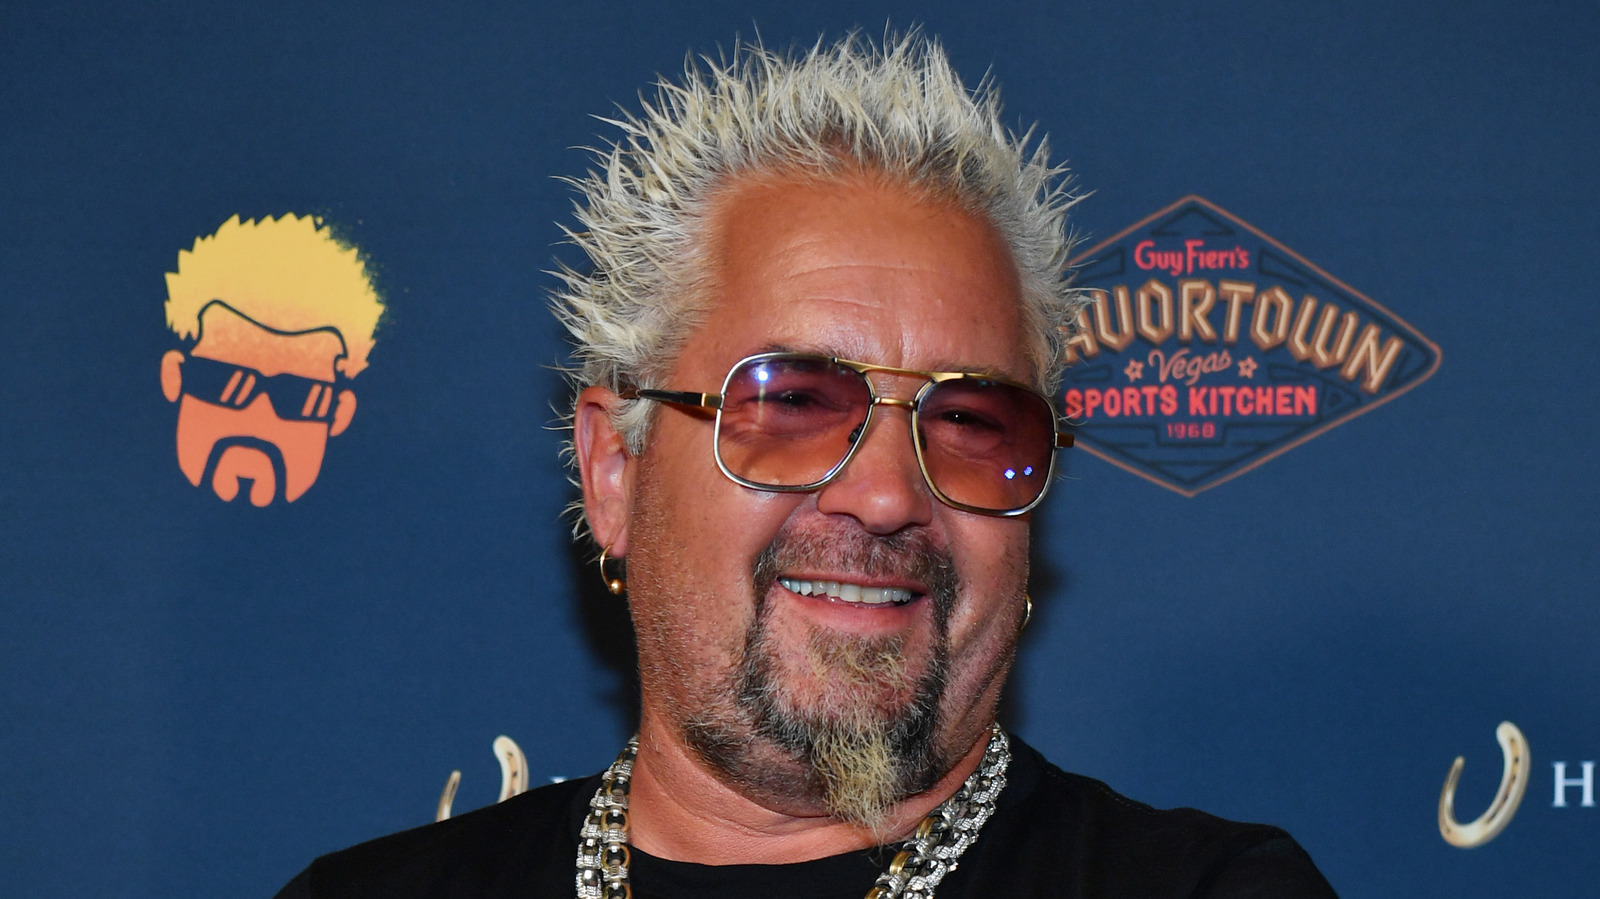 The Dish From Guy Fieri's New Restaurant He Would Love To Feature